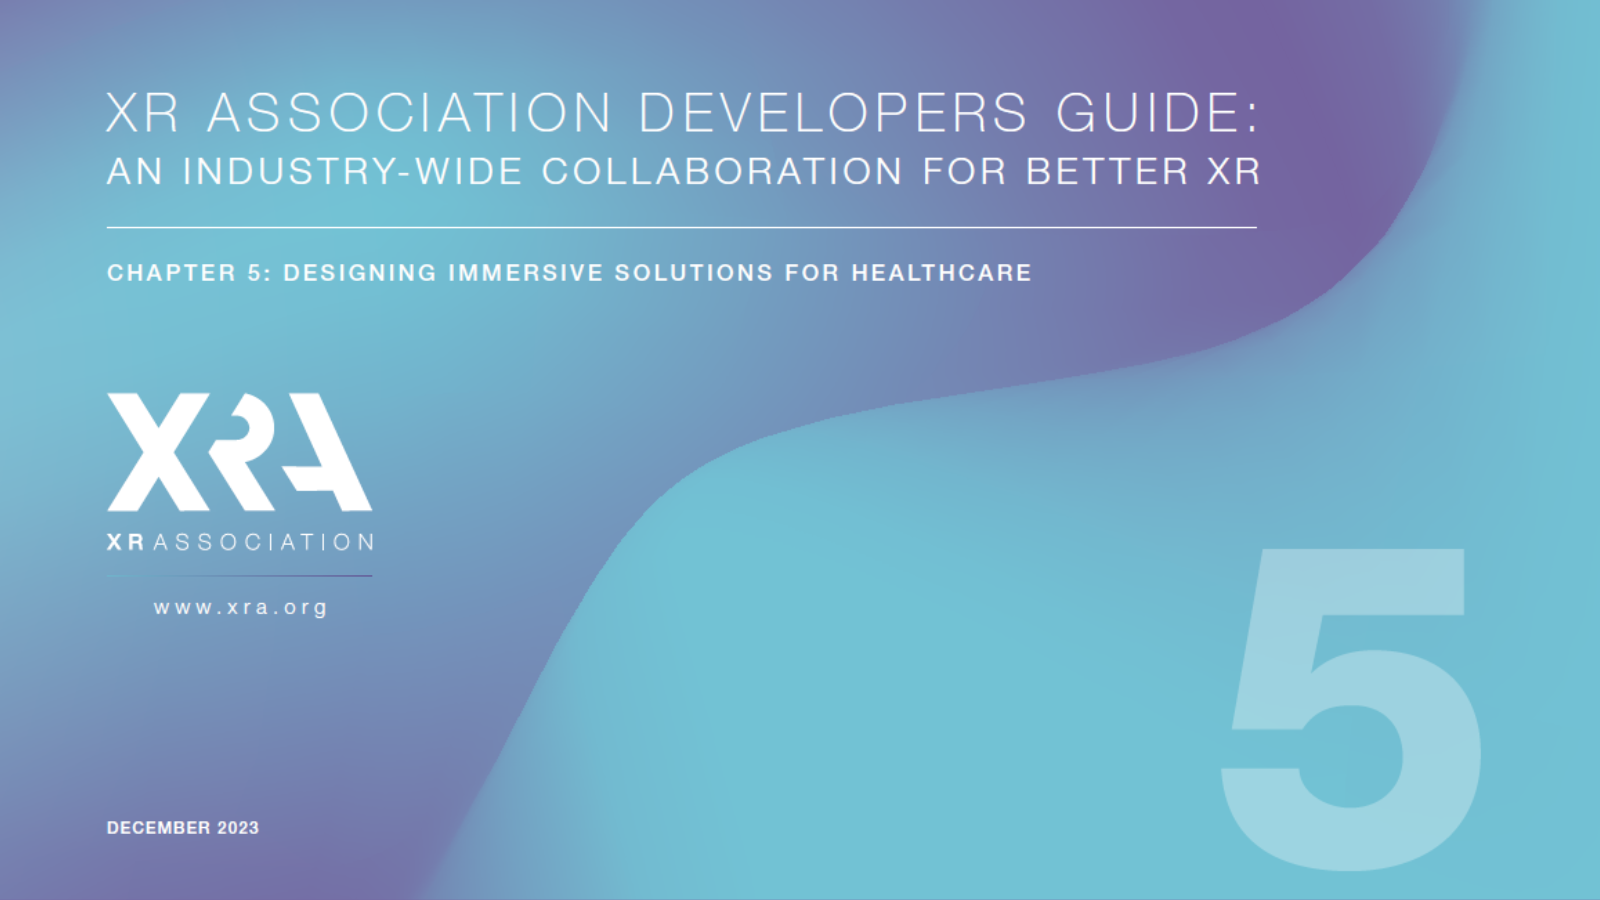 XR ASSOCIATION TO RELEASE LATEST CHAPTER OF DEVELOPERS GUIDE ON HEALTHCARE